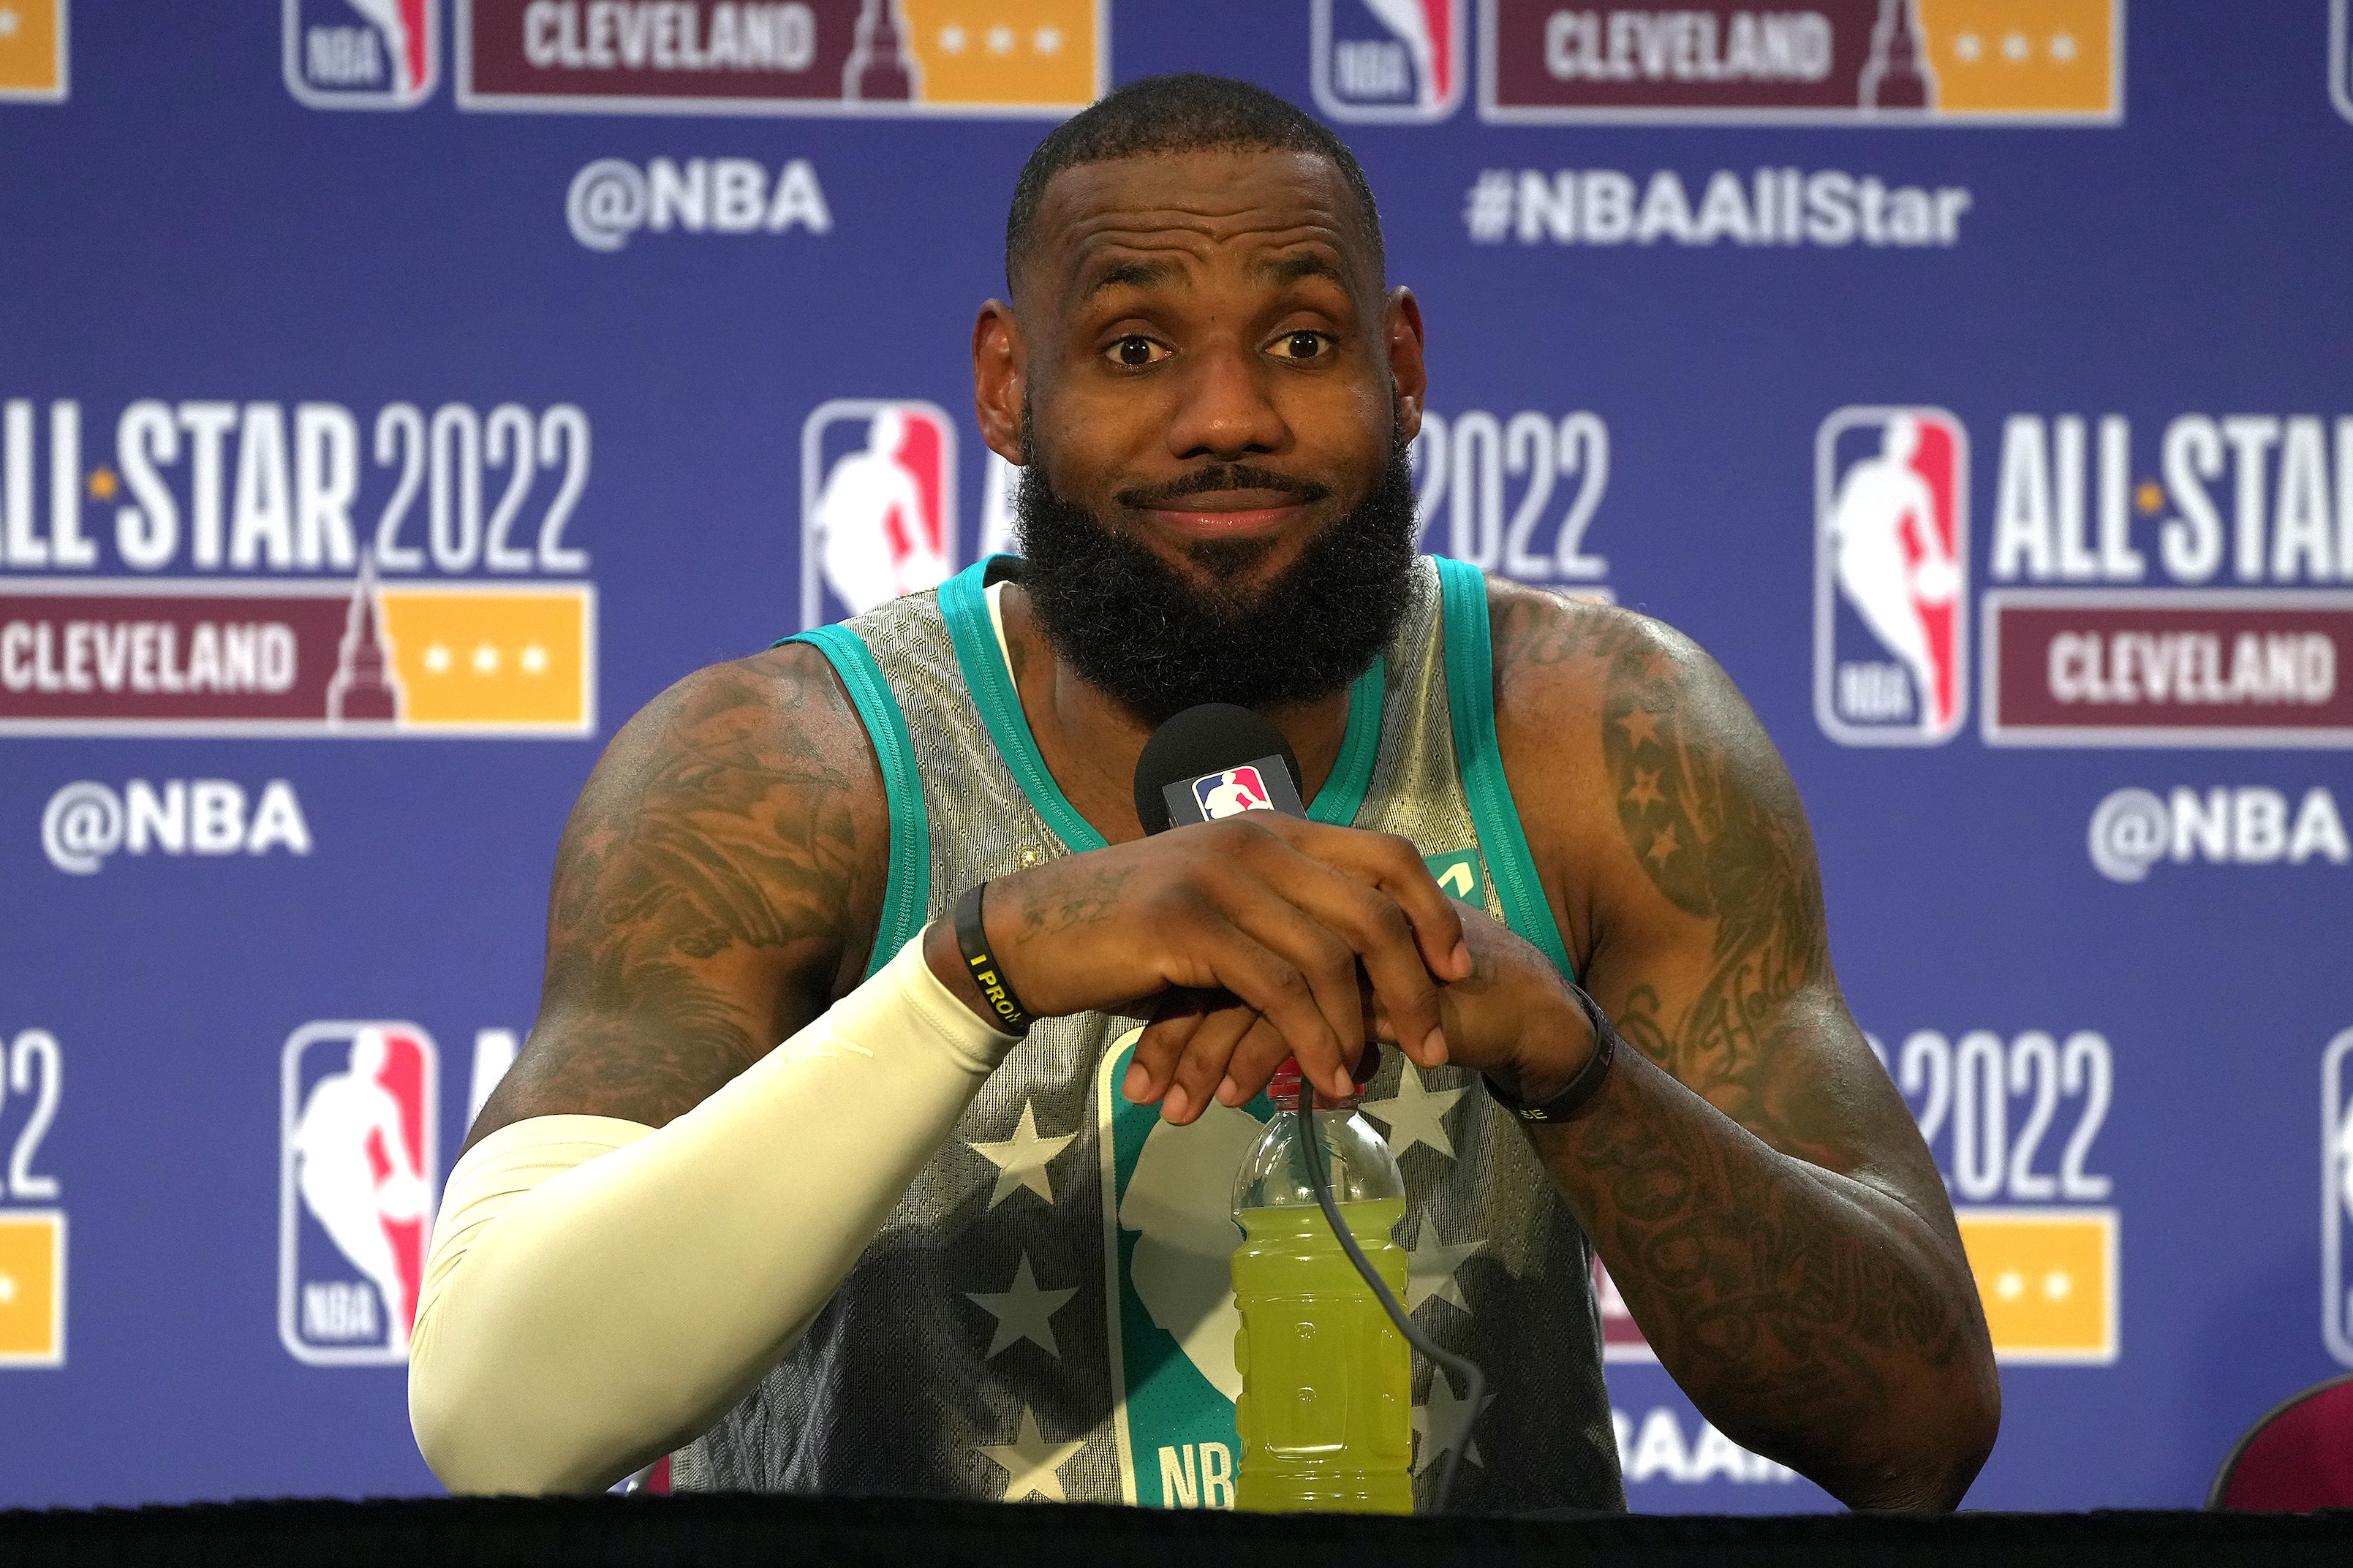 Los Angeles Lakers star LeBron James speaks during his postgame press conference after the 2022 NBA All-Star Game